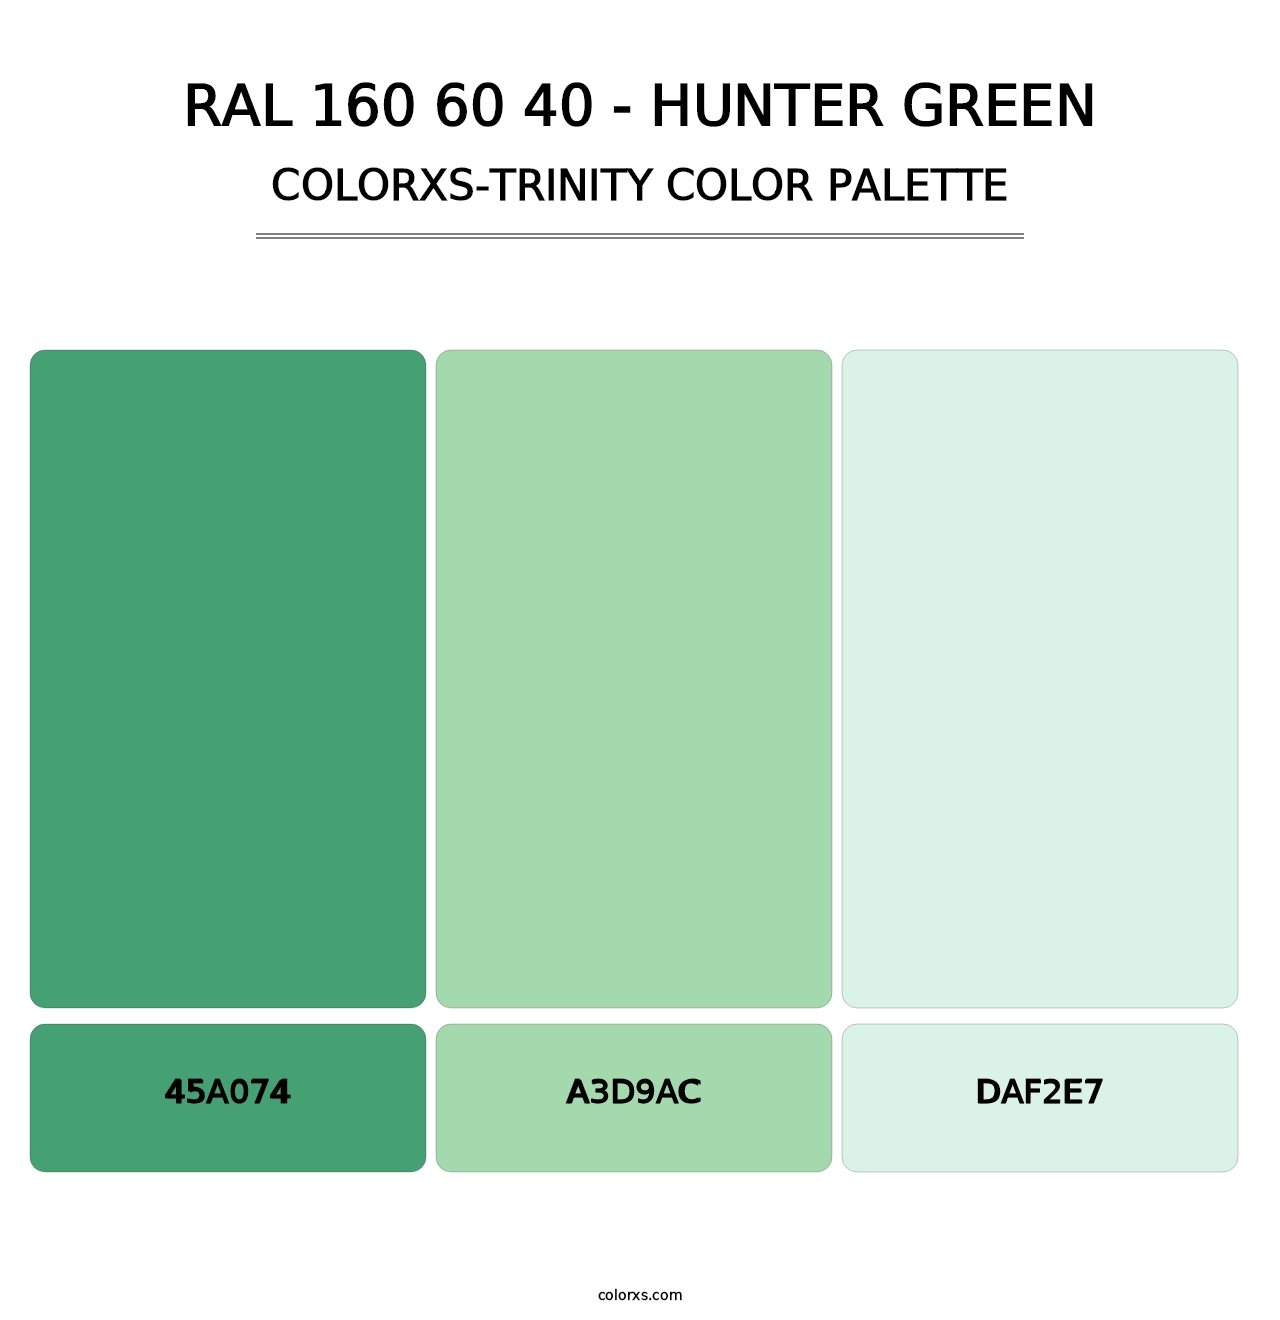 RAL 160 60 40 - Hunter Green - Colorxs Trinity Palette